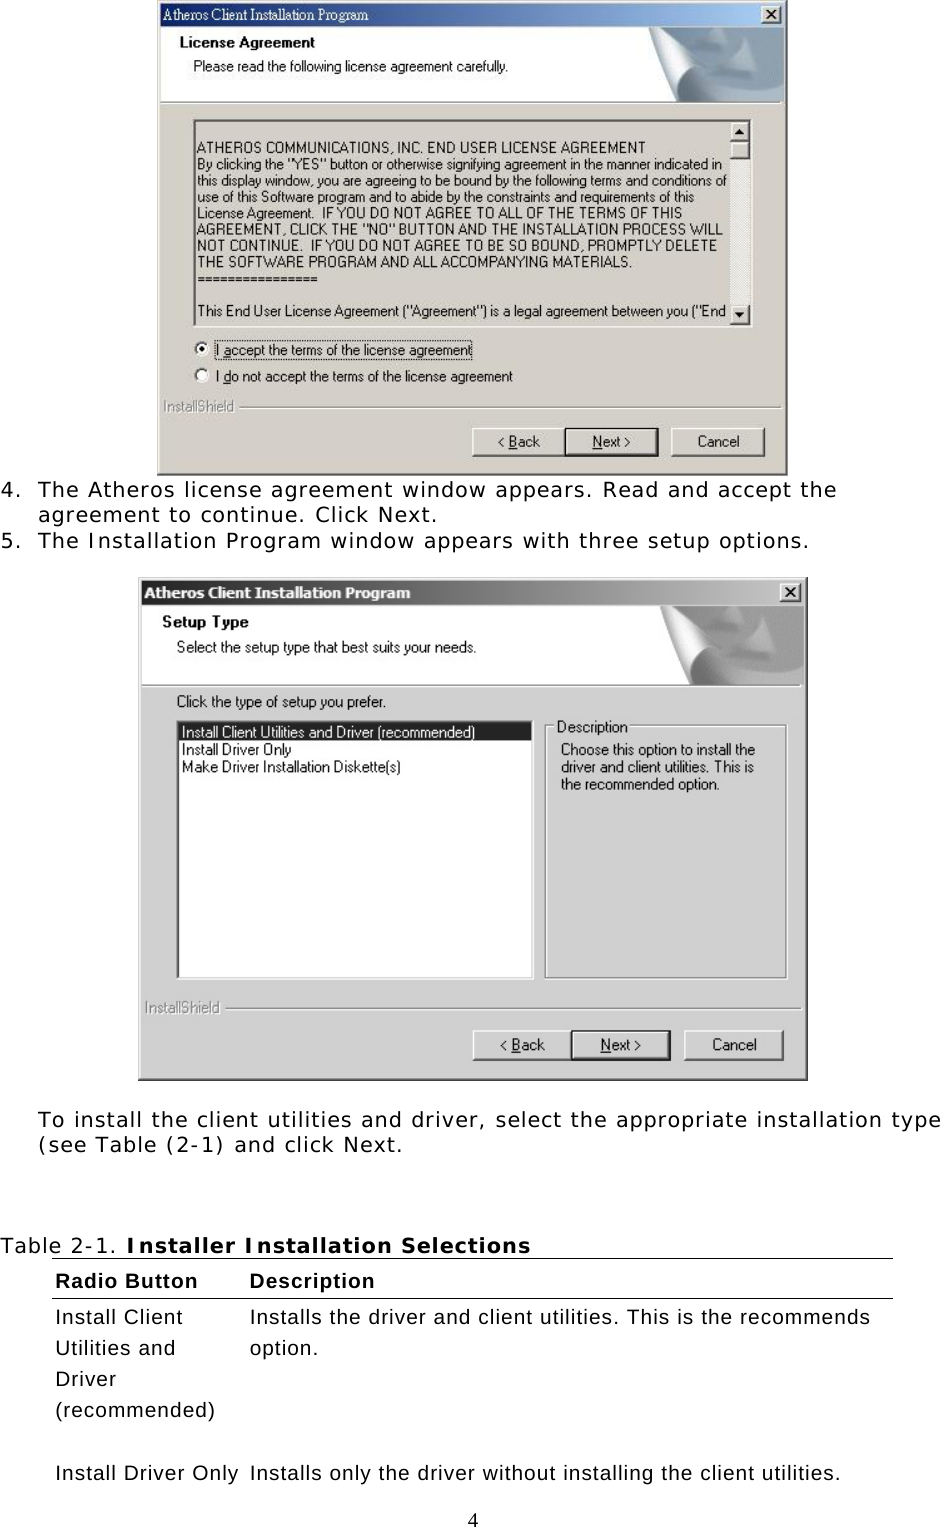  4  4.  The Atheros license agreement window appears. Read and accept the agreement to continue. Click Next. 5.  The Installation Program window appears with three setup options.    To install the client utilities and driver, select the appropriate installation type (see Table (2-1) and click Next.    Table 2-1. Installer Installation Selections Radio Button  Description Install Client Utilities and Driver (recommended) Installs the driver and client utilities. This is the recommends option.    Install Driver Only  Installs only the driver without installing the client utilities. 